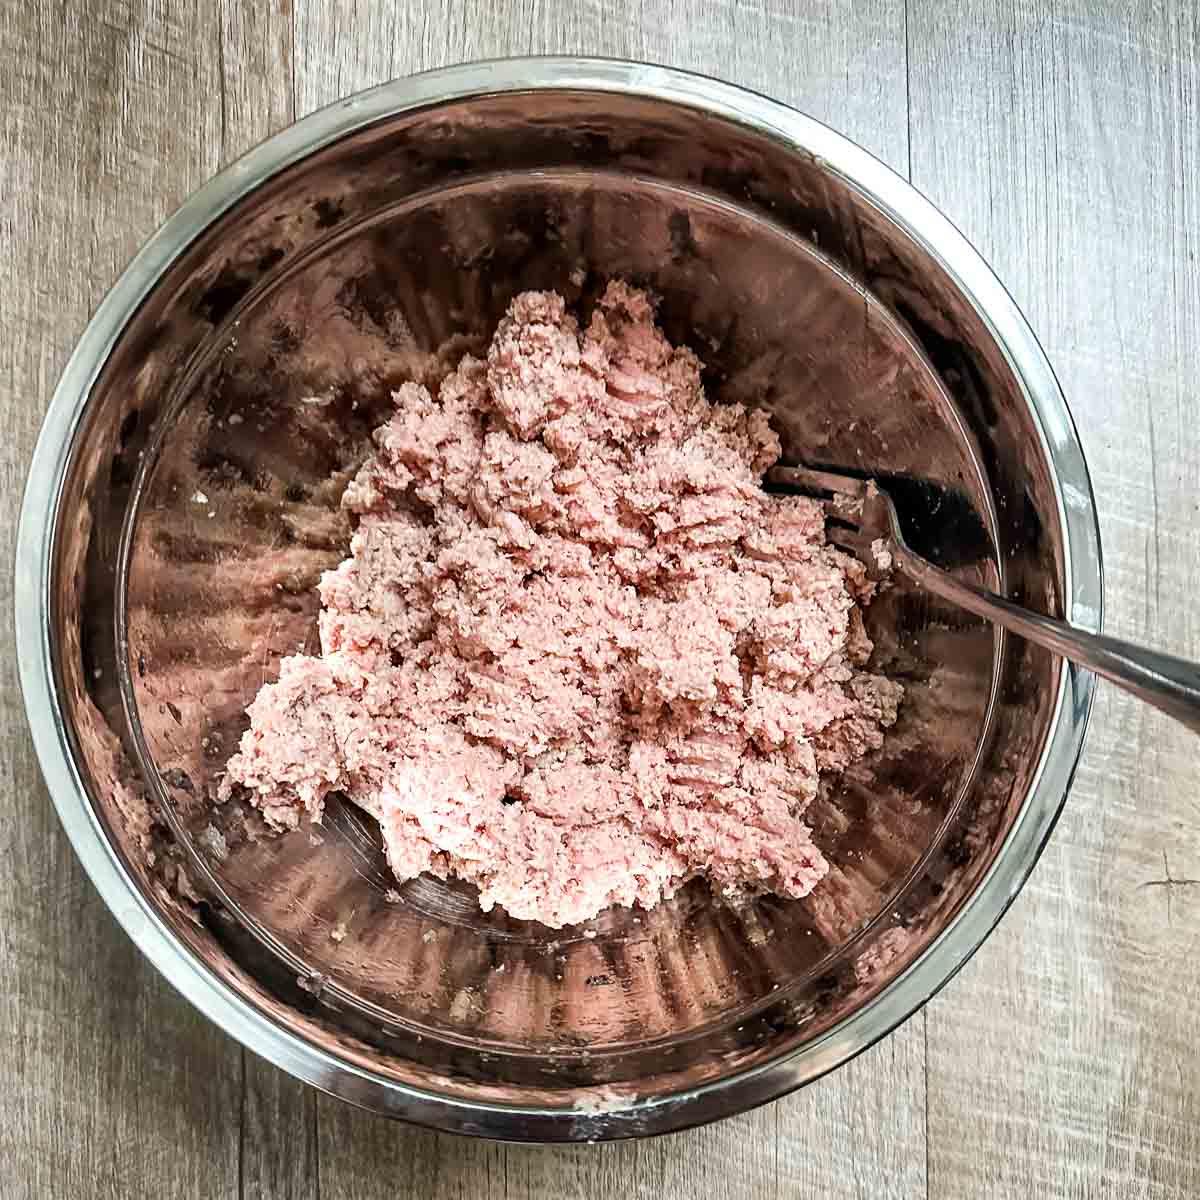 ground turkey, salt, pepper, grated onion, and Worcestershire are mixed in a stainless steel bowl.